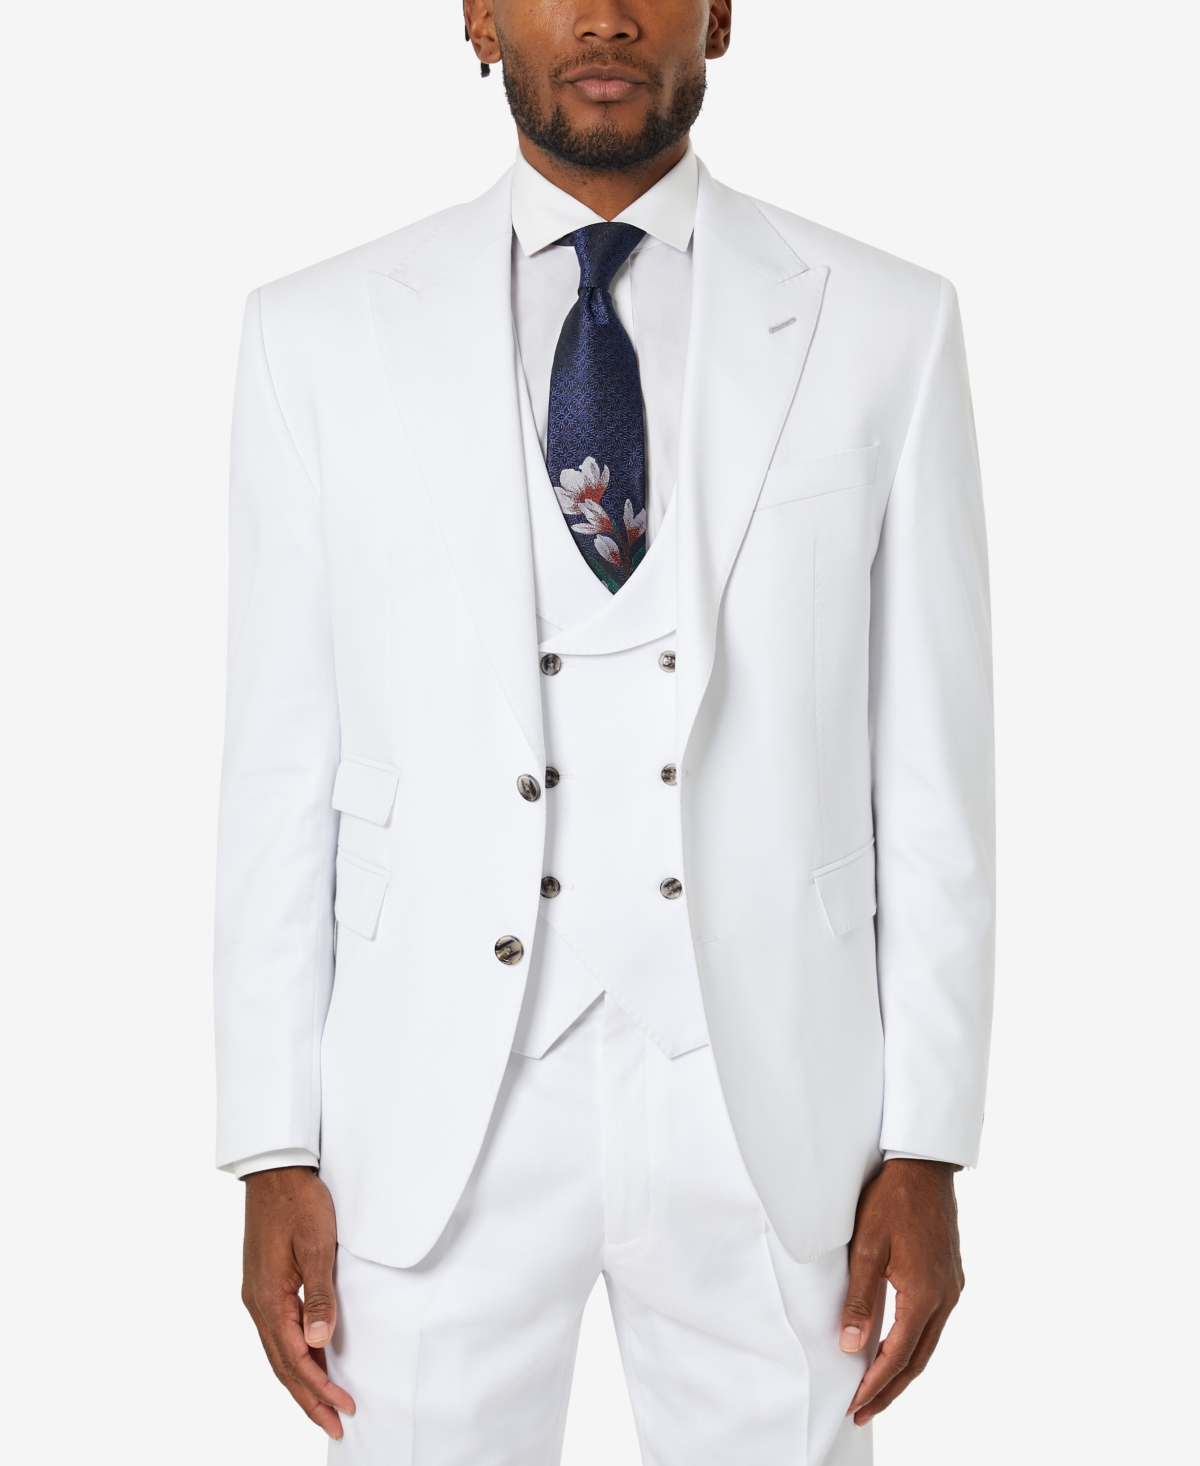 TAYION COLLECTION MEN'S CLASSIC-FIT SUIT JACKET